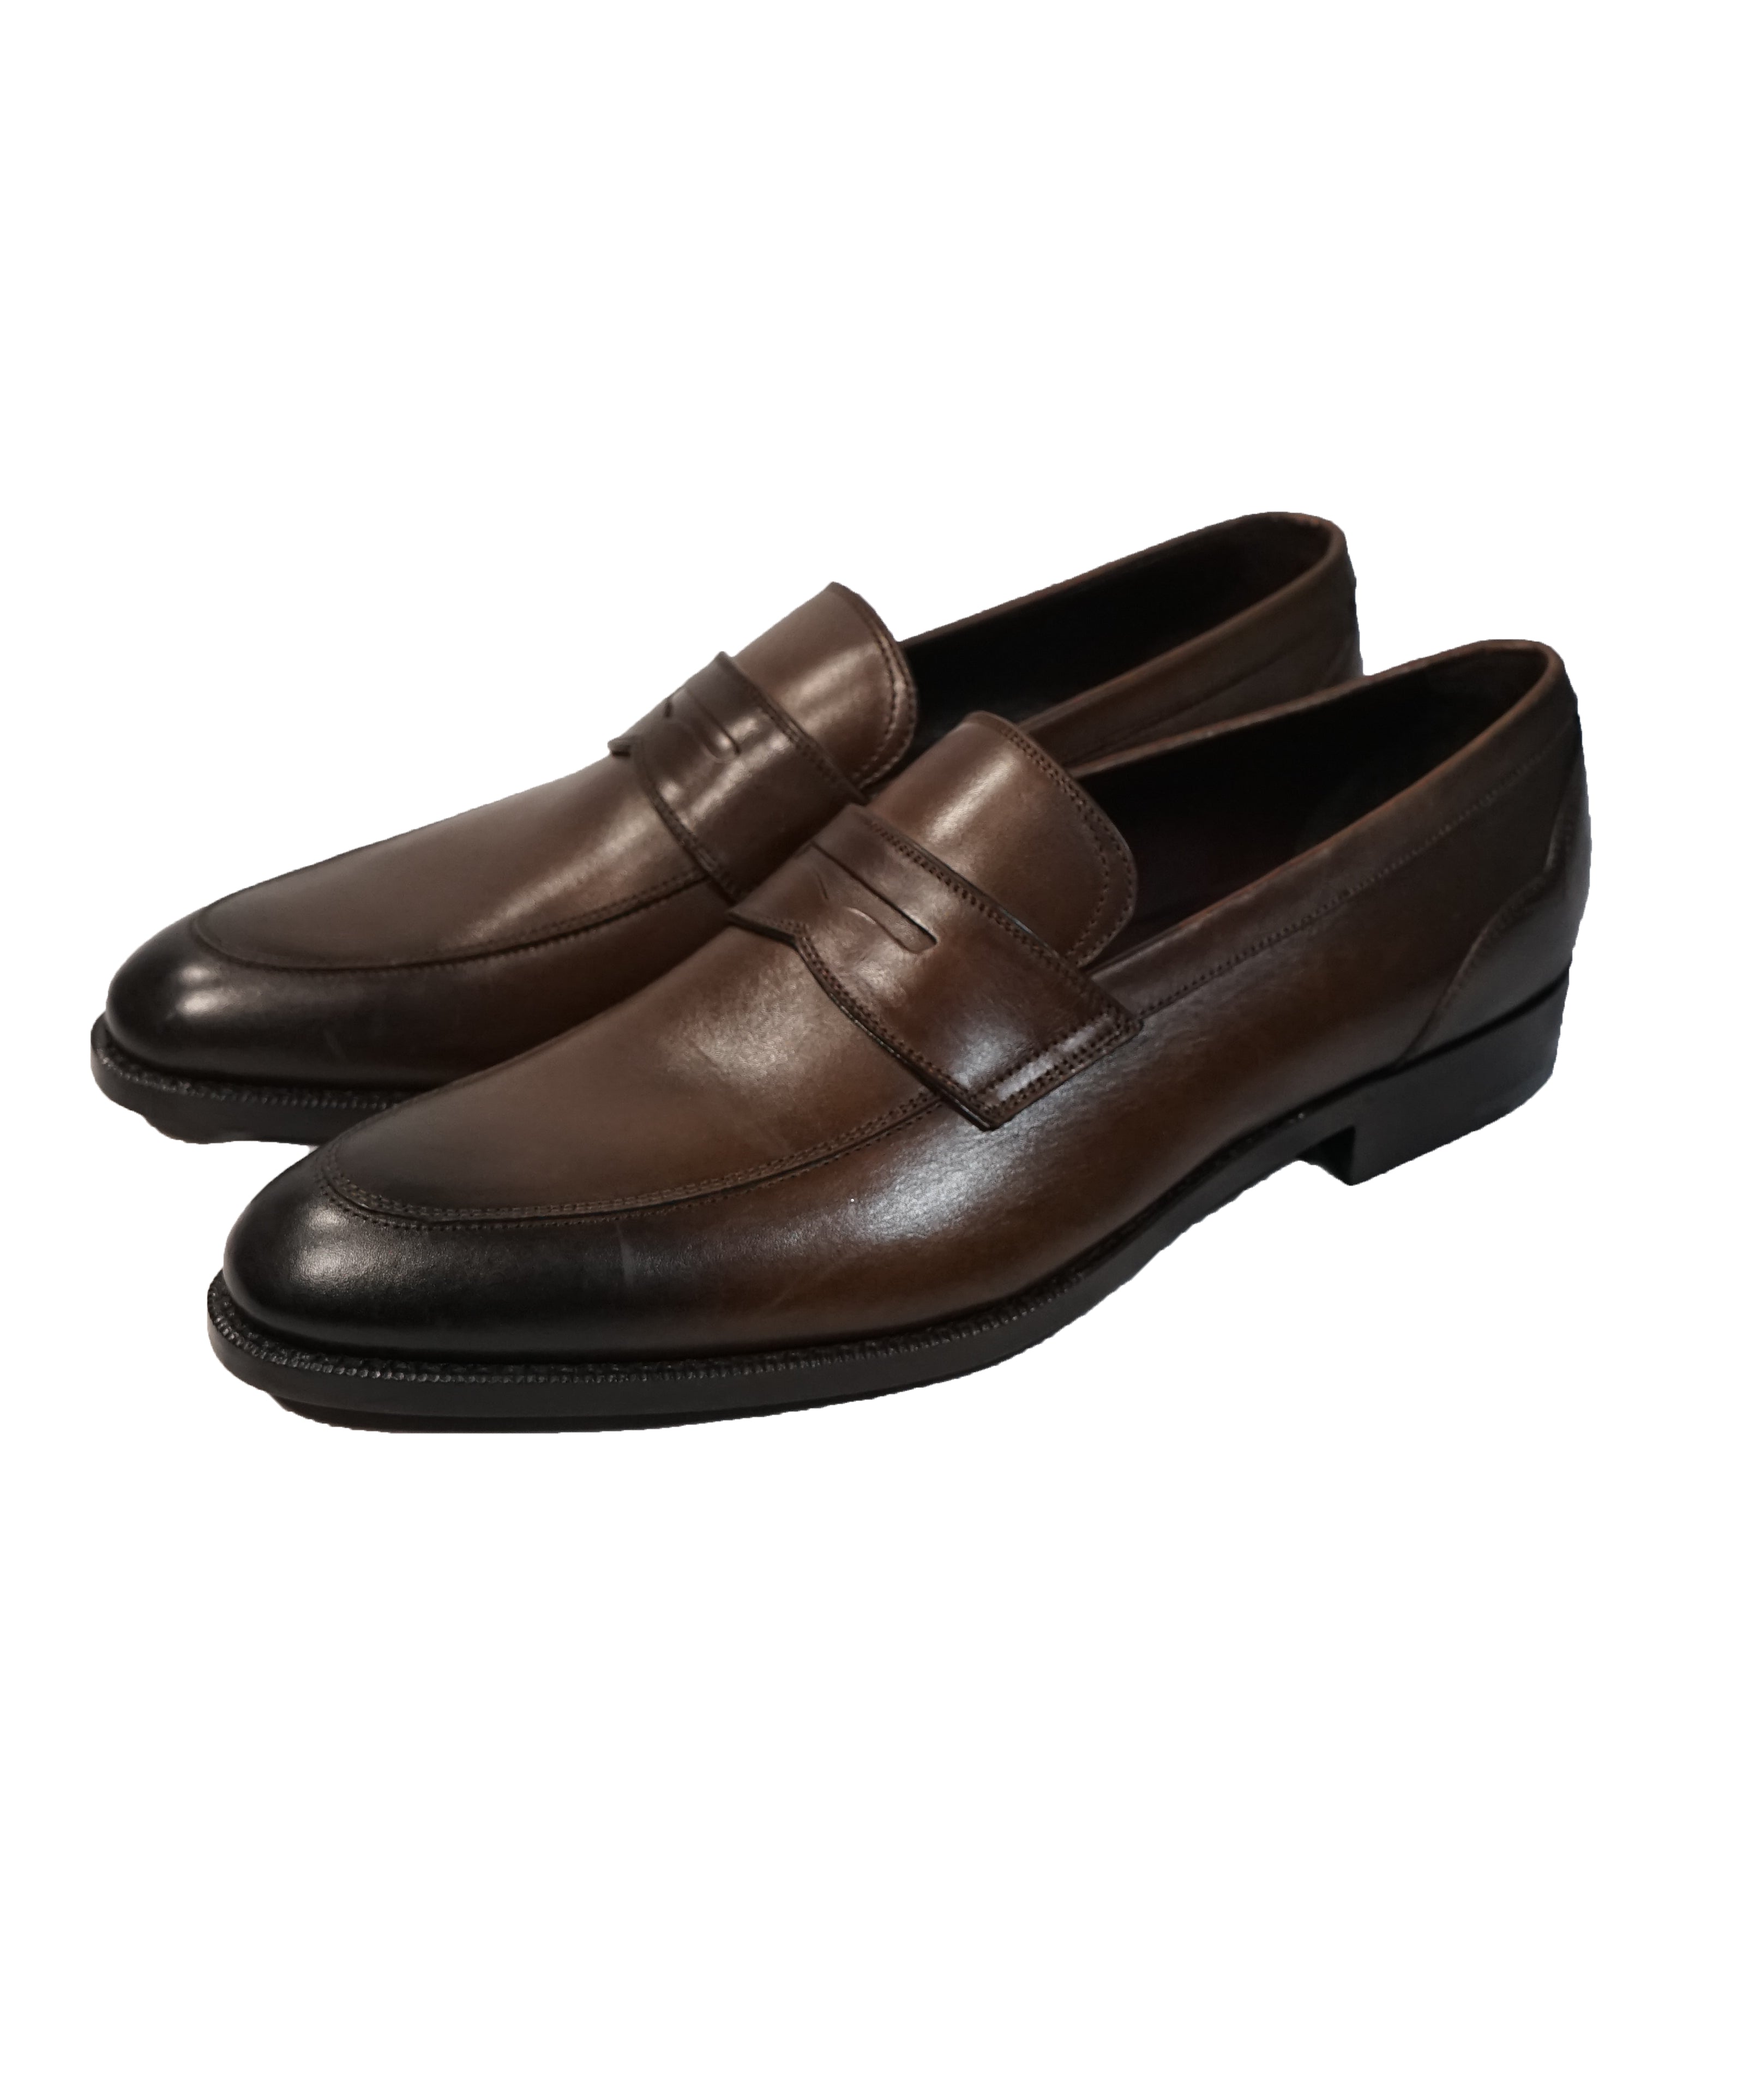 zegna loafers